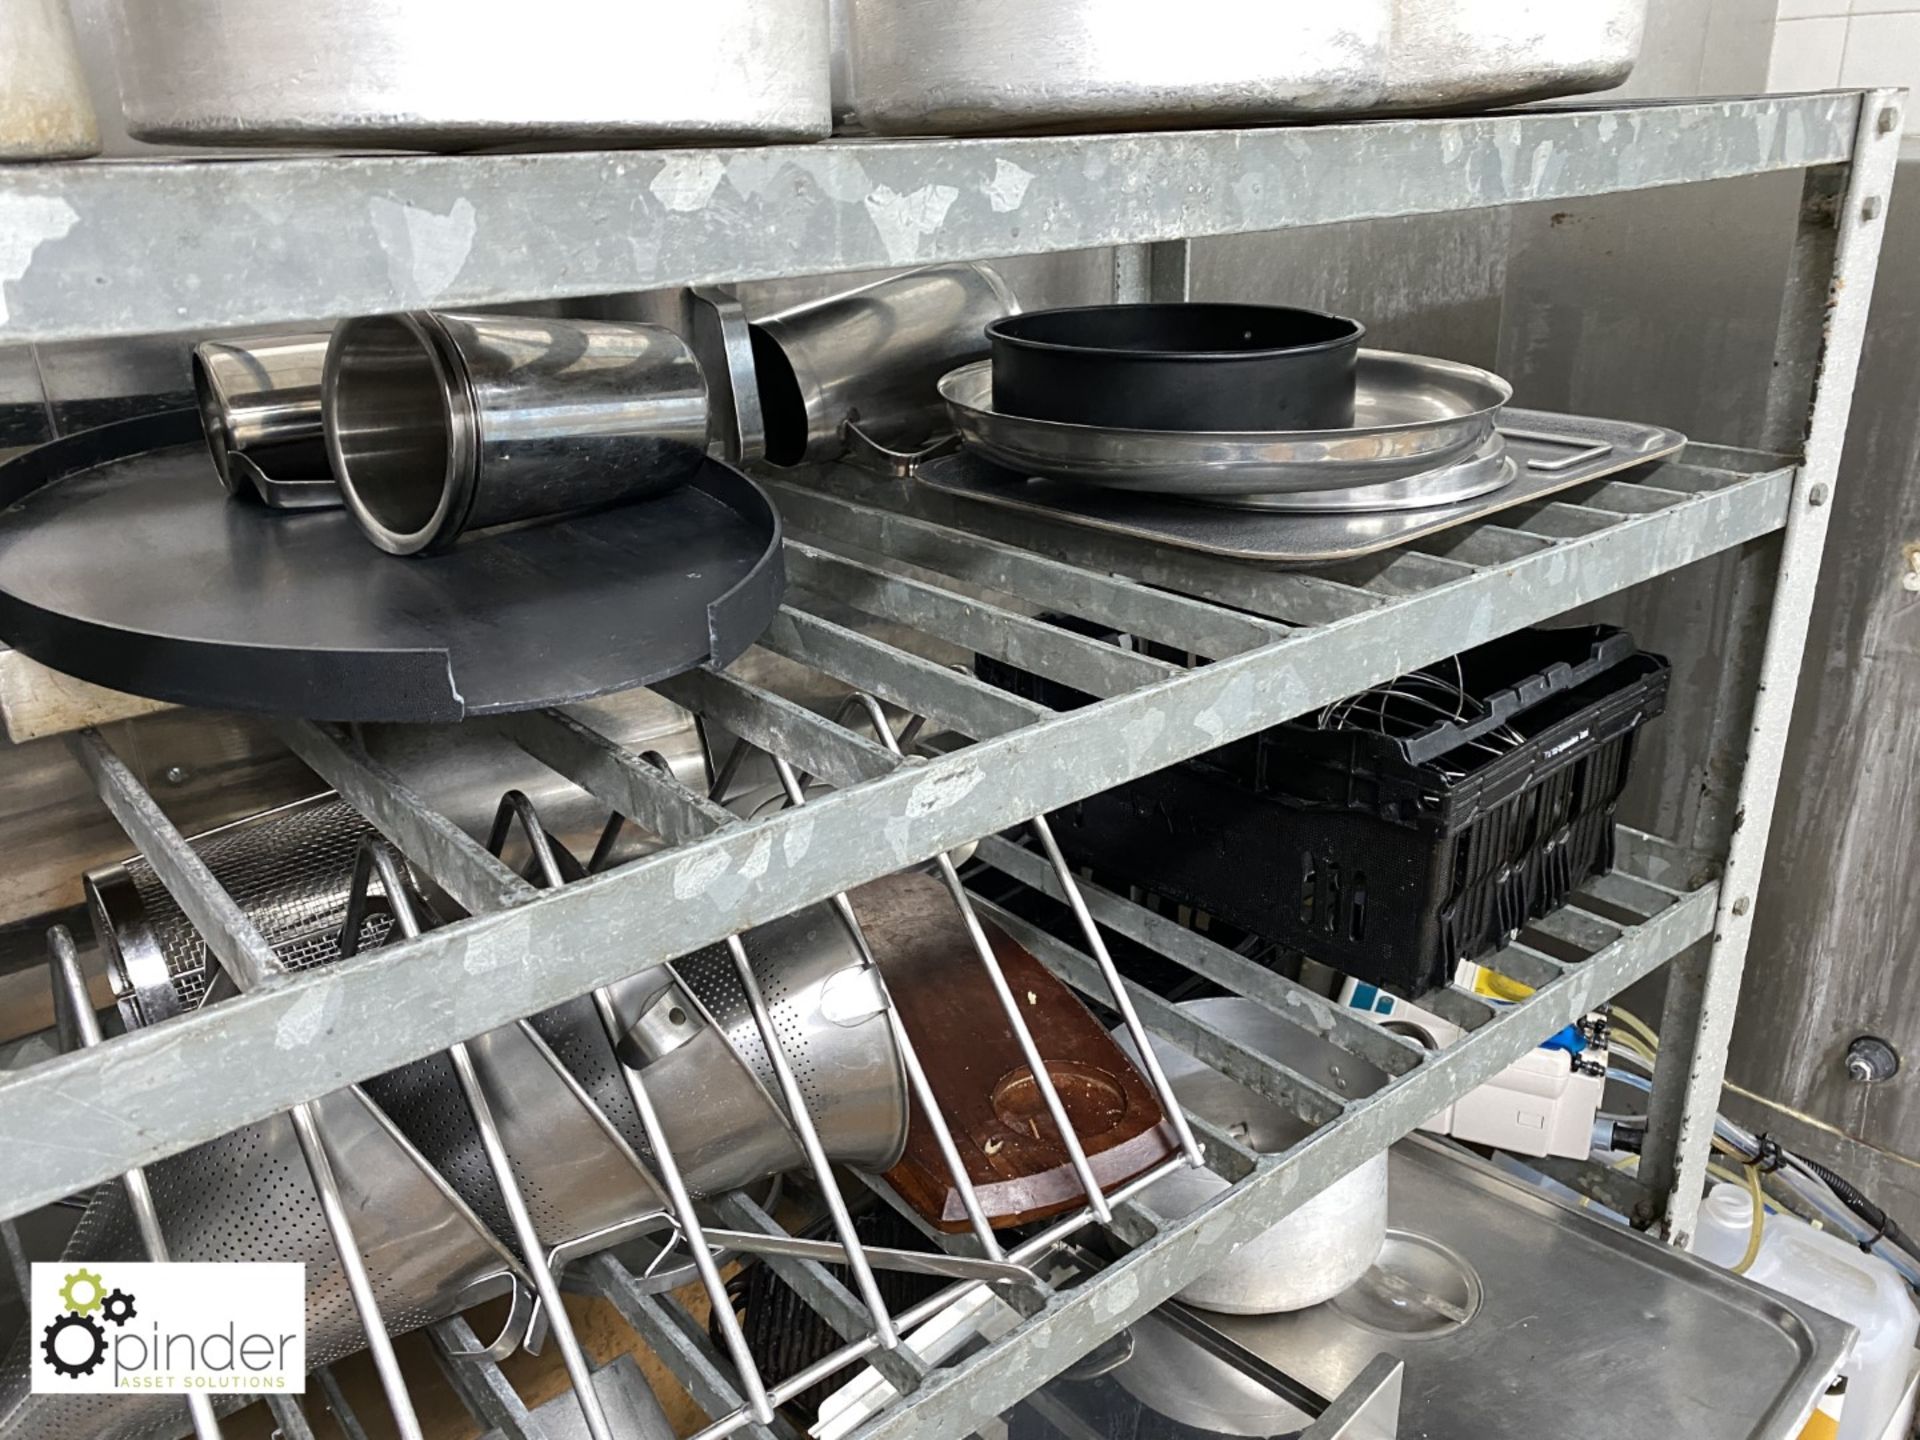 Large quantity Cooking Pots, Sieves, Trays, Pans, etc, to rack (located in Pot Wash Room, - Image 4 of 11